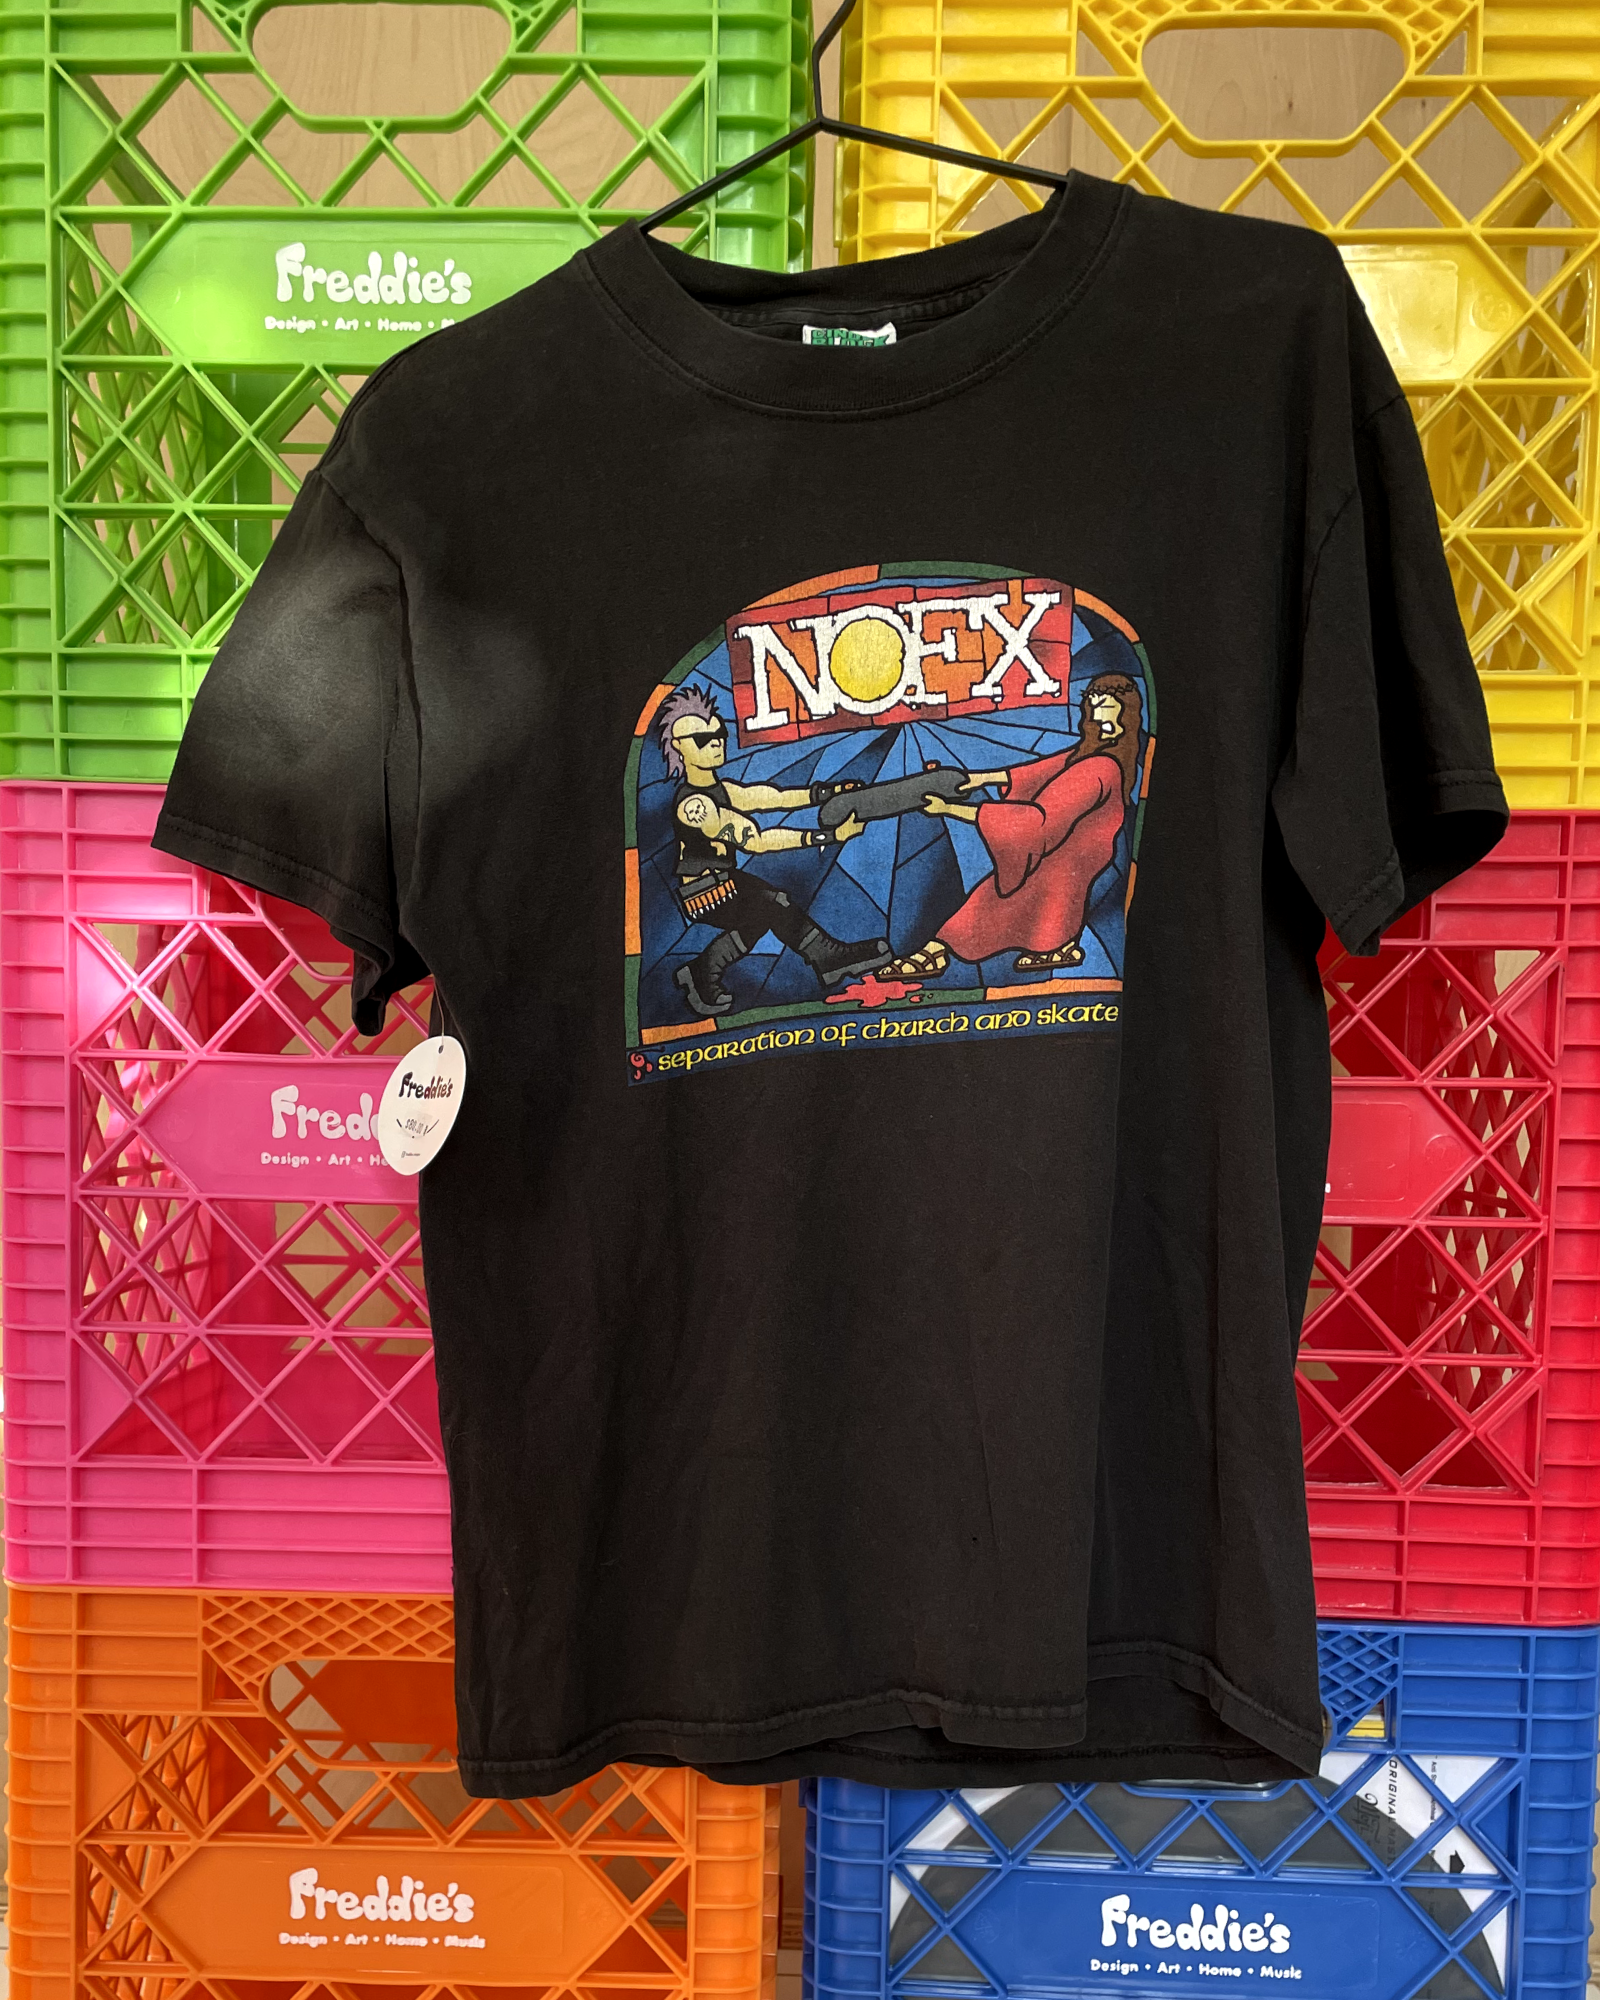 NOFX Separation of Church and Skate Tee Size M